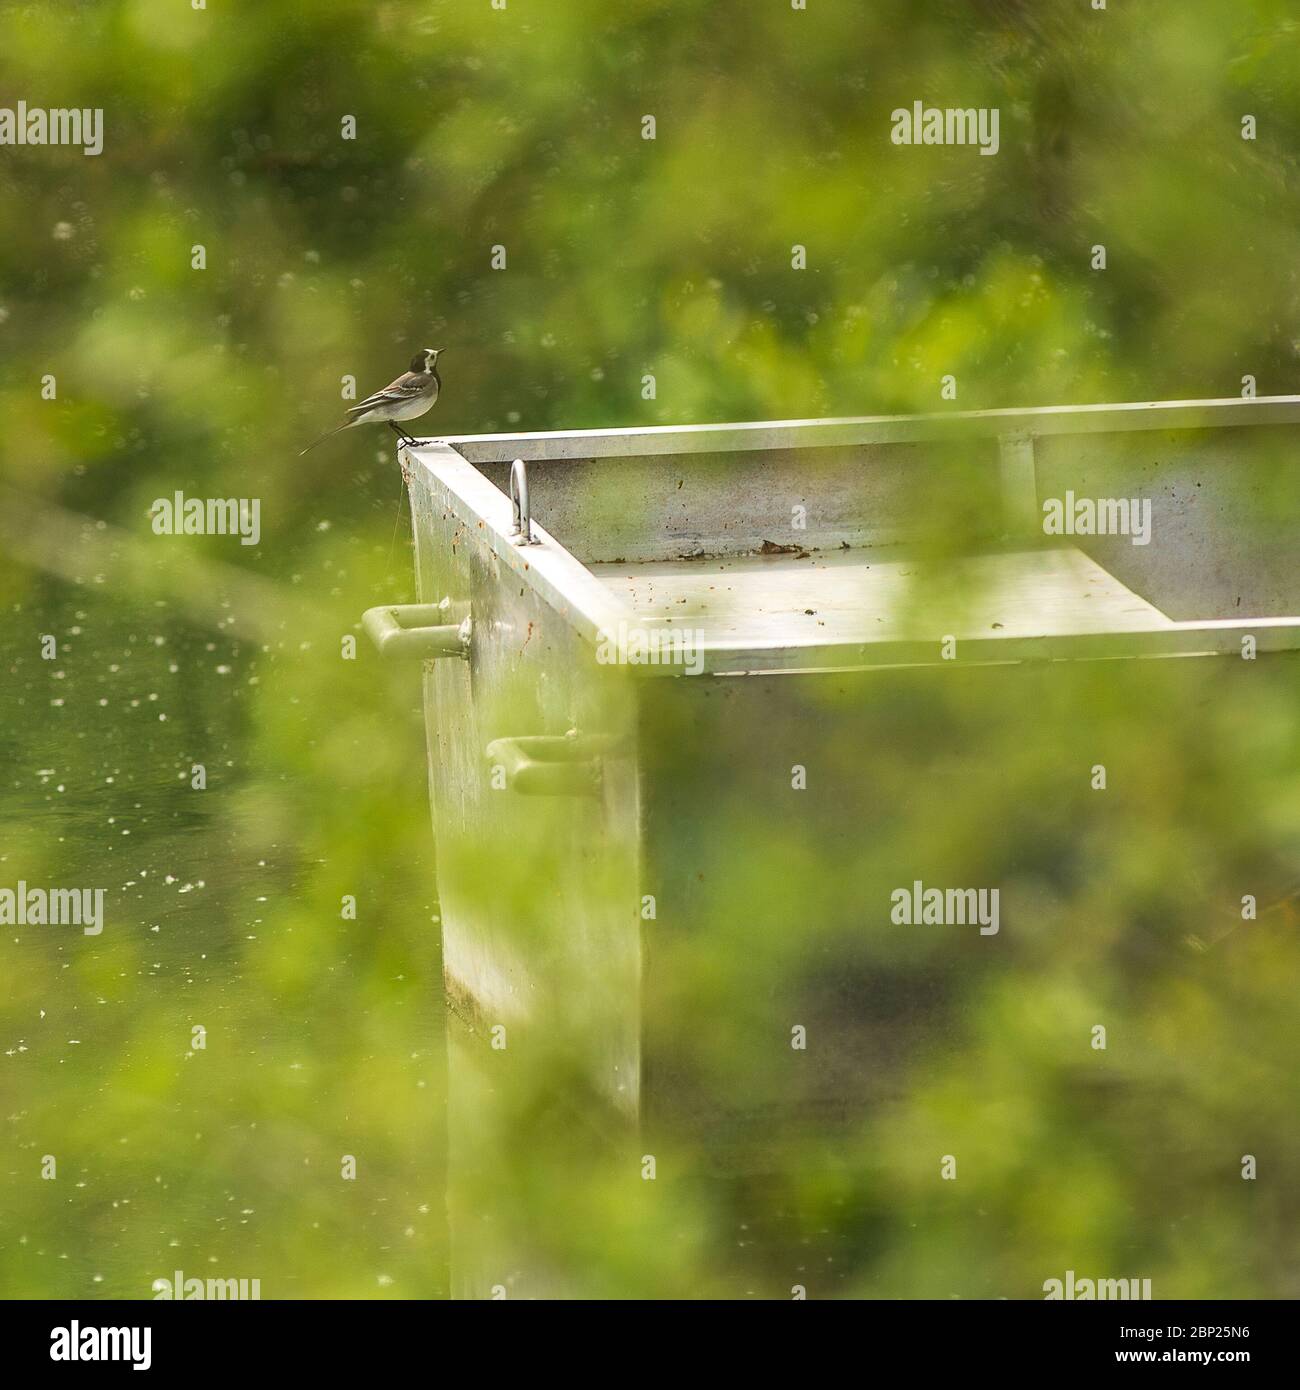 View of a fly catcher bird standing on a boat behind leaves Stock Photo